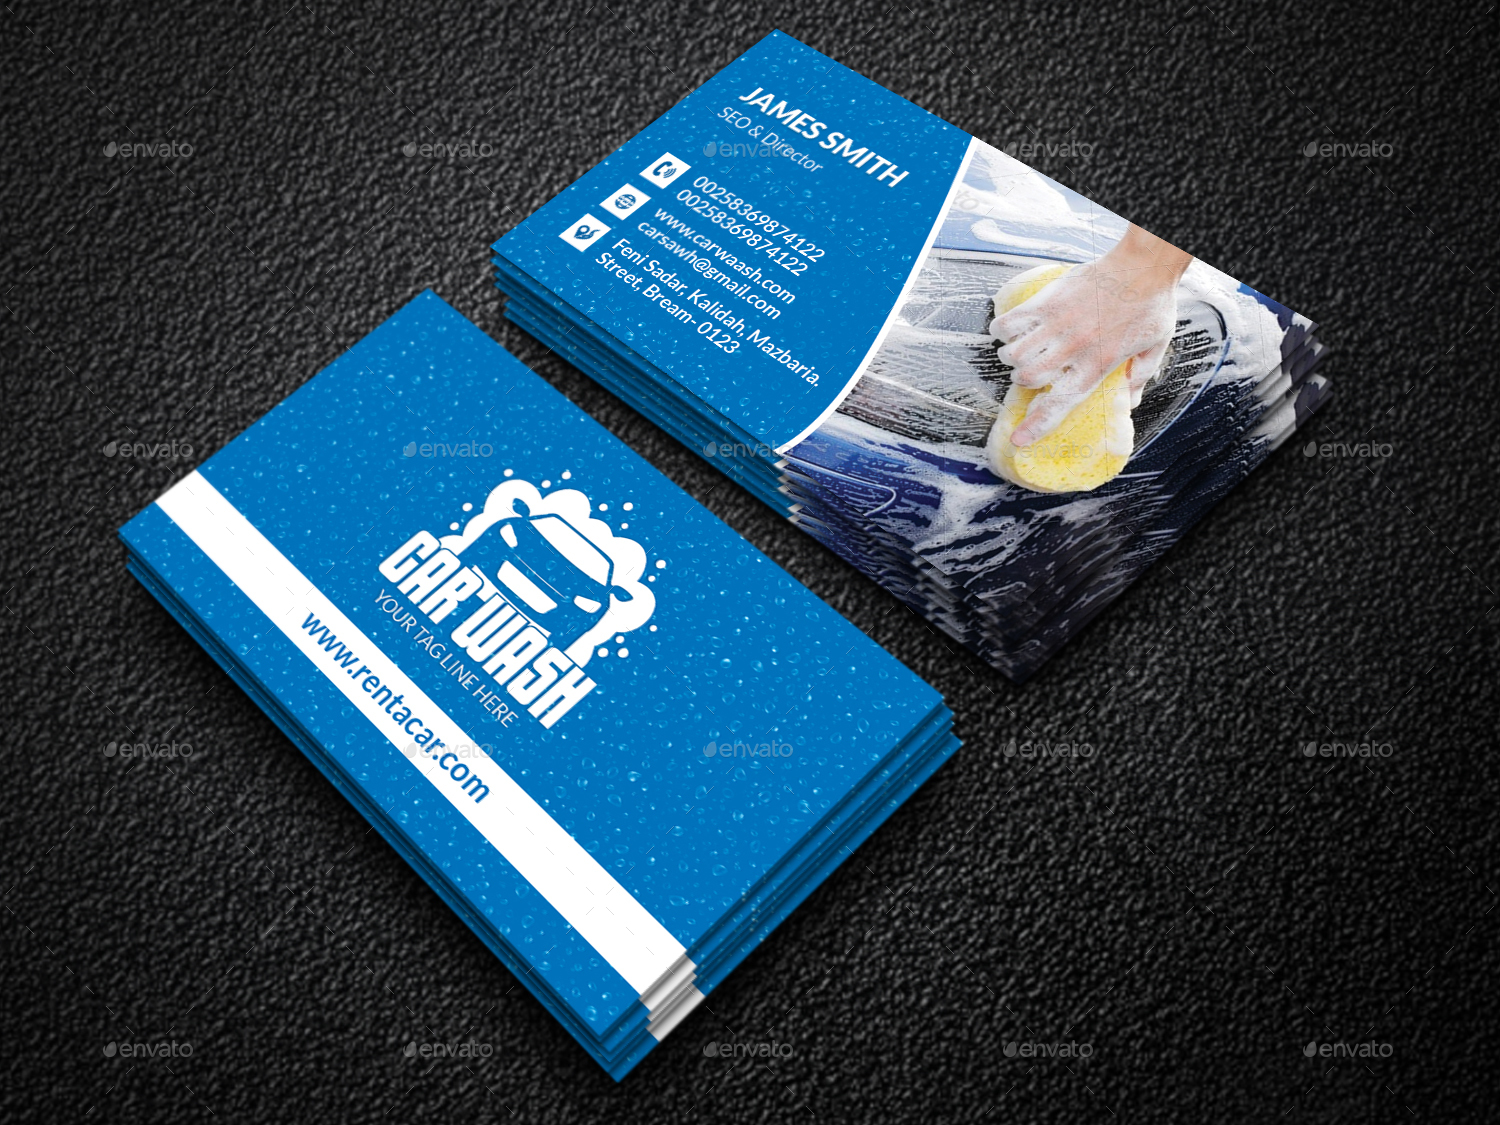 carwash business cards 3